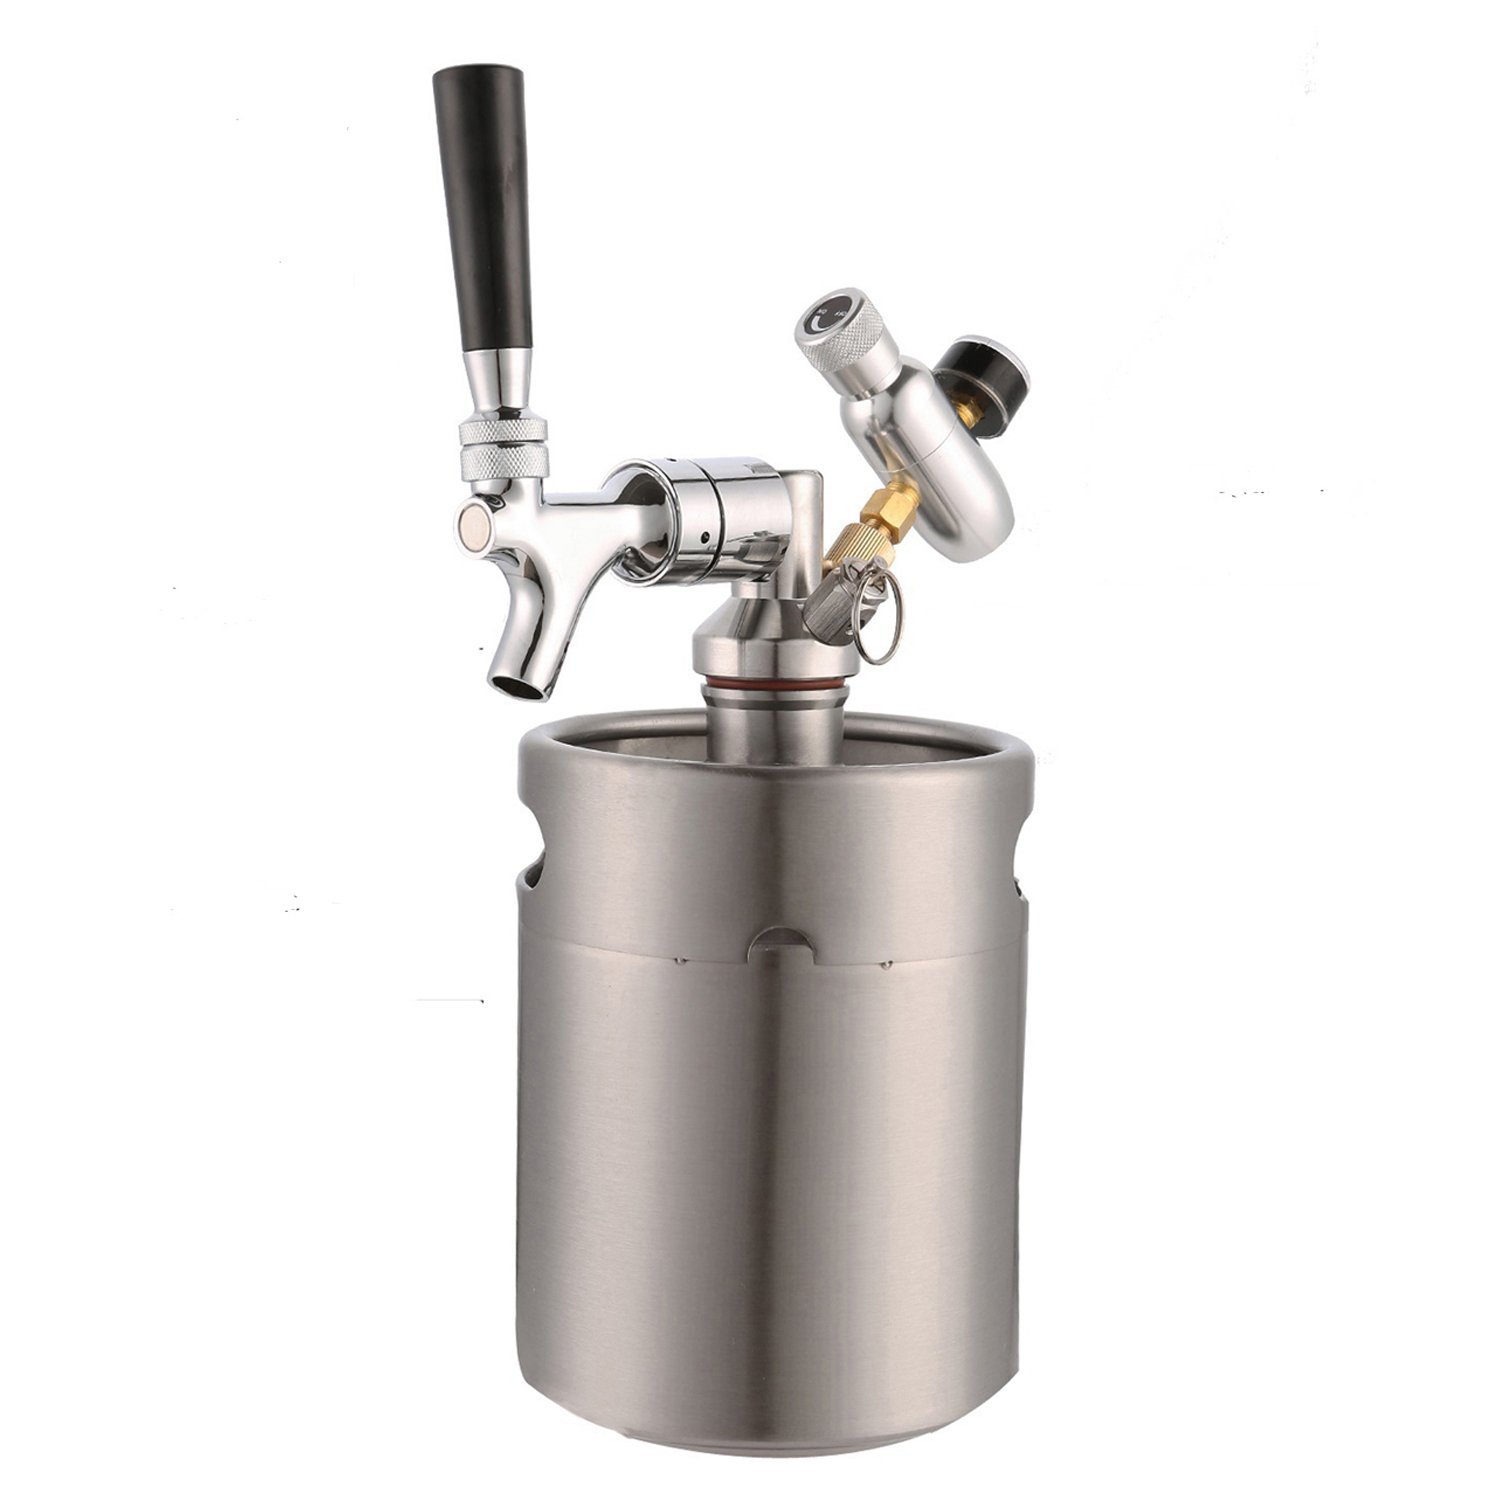 HAN-MM 64 Ounce Homebrew Keg System Kit for Home Brew Beer - with a HAN-MM Beer Dispensor, HAN-MM Mini CO2 Regulator and a HAN-MM 64 Ounce Stainless Steel Keg